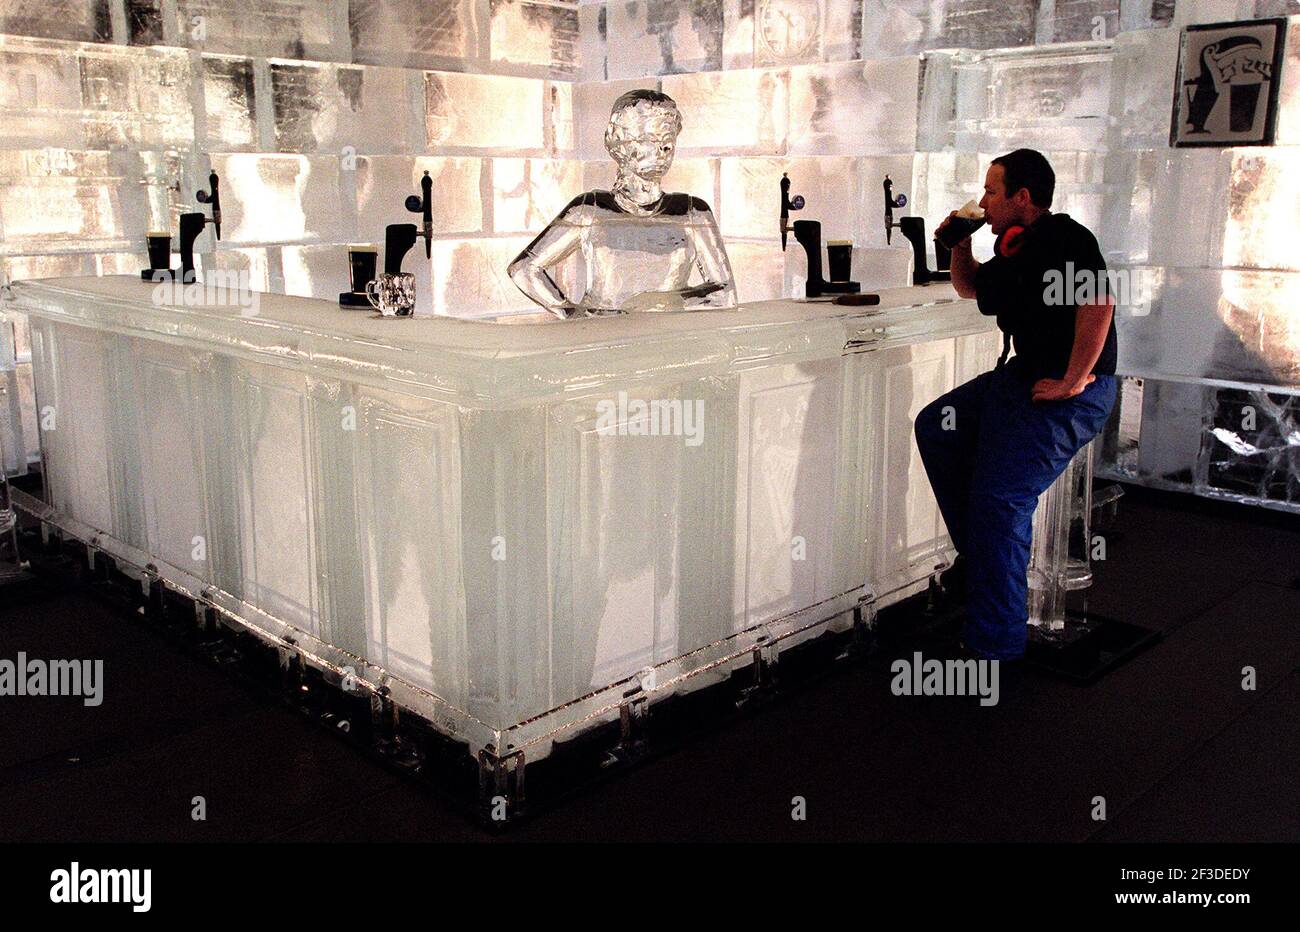 A WORKMAN SAMPLES A COLD GUINNESS AT THE ICE SCULPTURE BAR ON DISPLAY FOR A LIMITED TIME(UNTIL IT MELTS!) AT THE BROADGATE CIRCUS TODAY. SPONSORED BY GUINNESS . Stock Photo